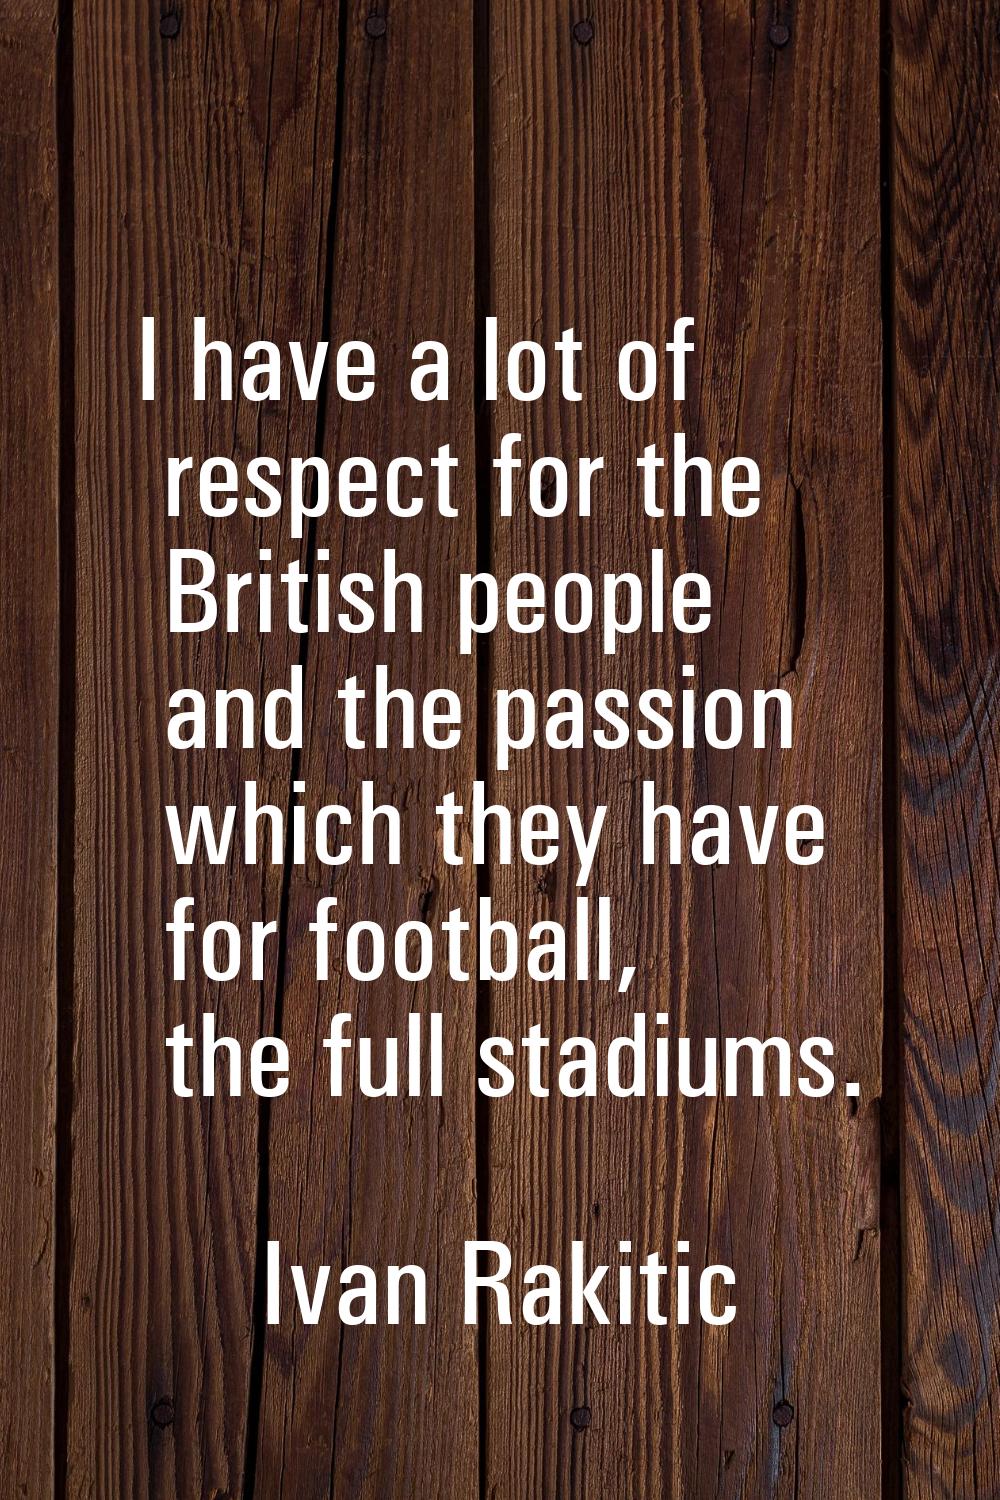 I have a lot of respect for the British people and the passion which they have for football, the fu